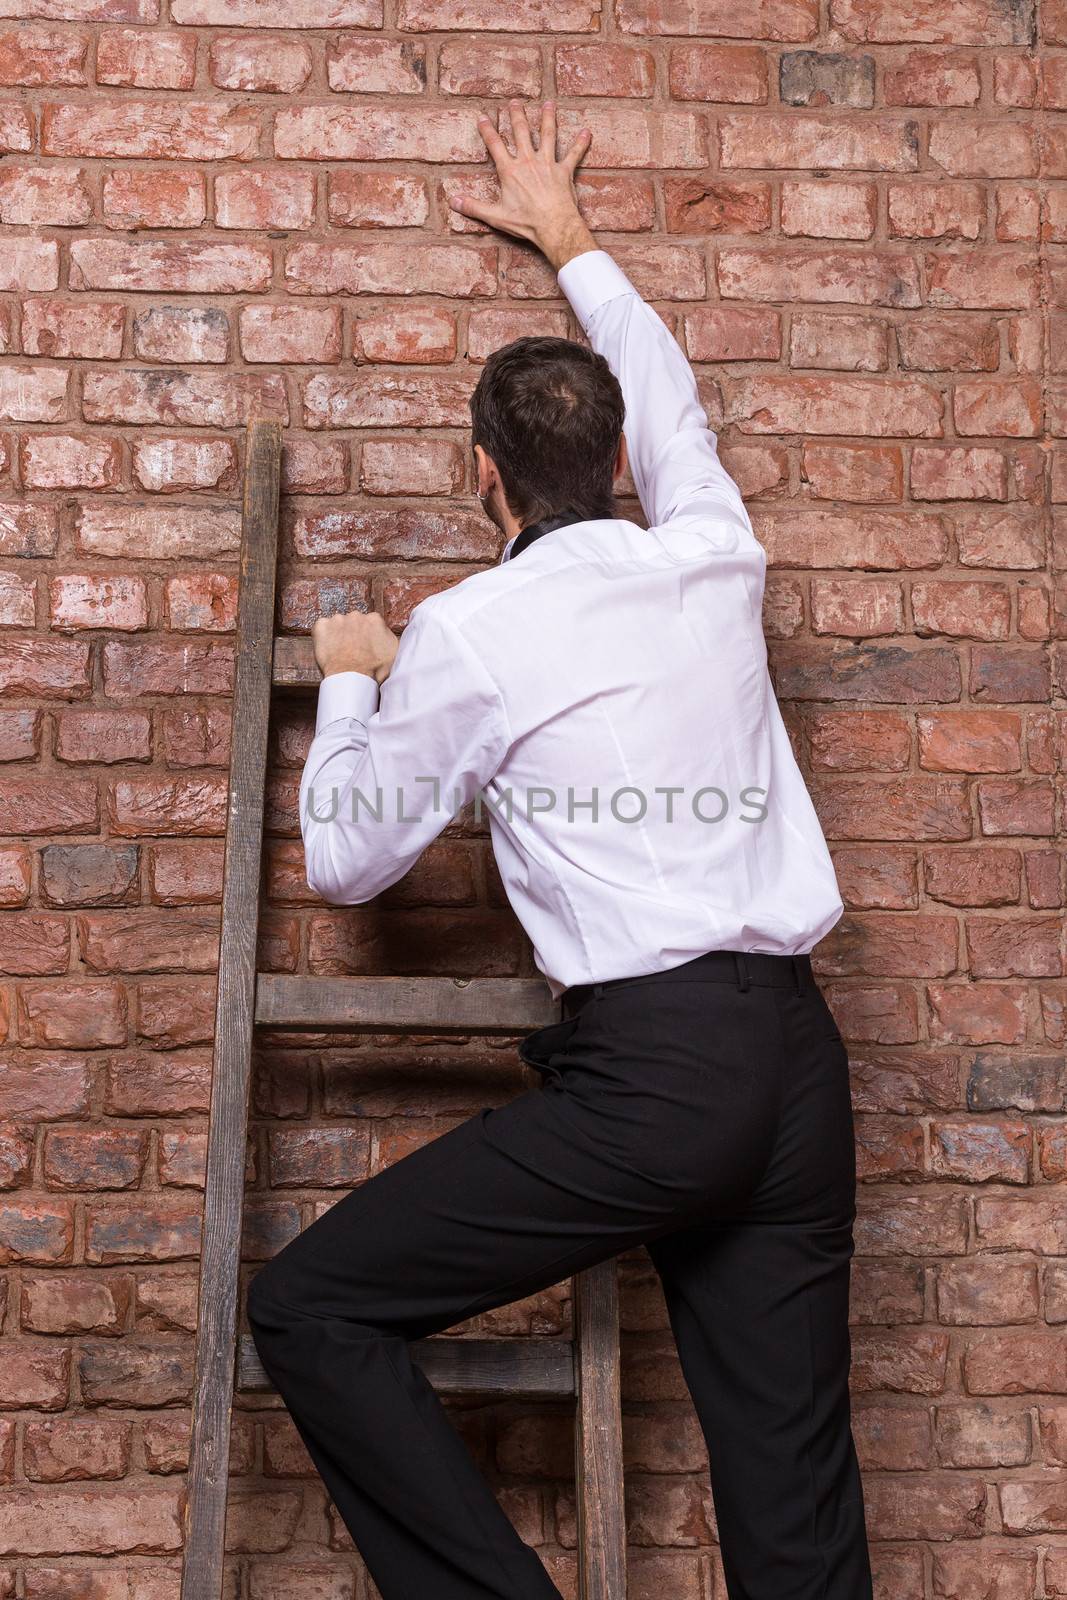 Man at the end of his search up against a brick wall standing balanced at the top of a stepladder, nowhere else to go